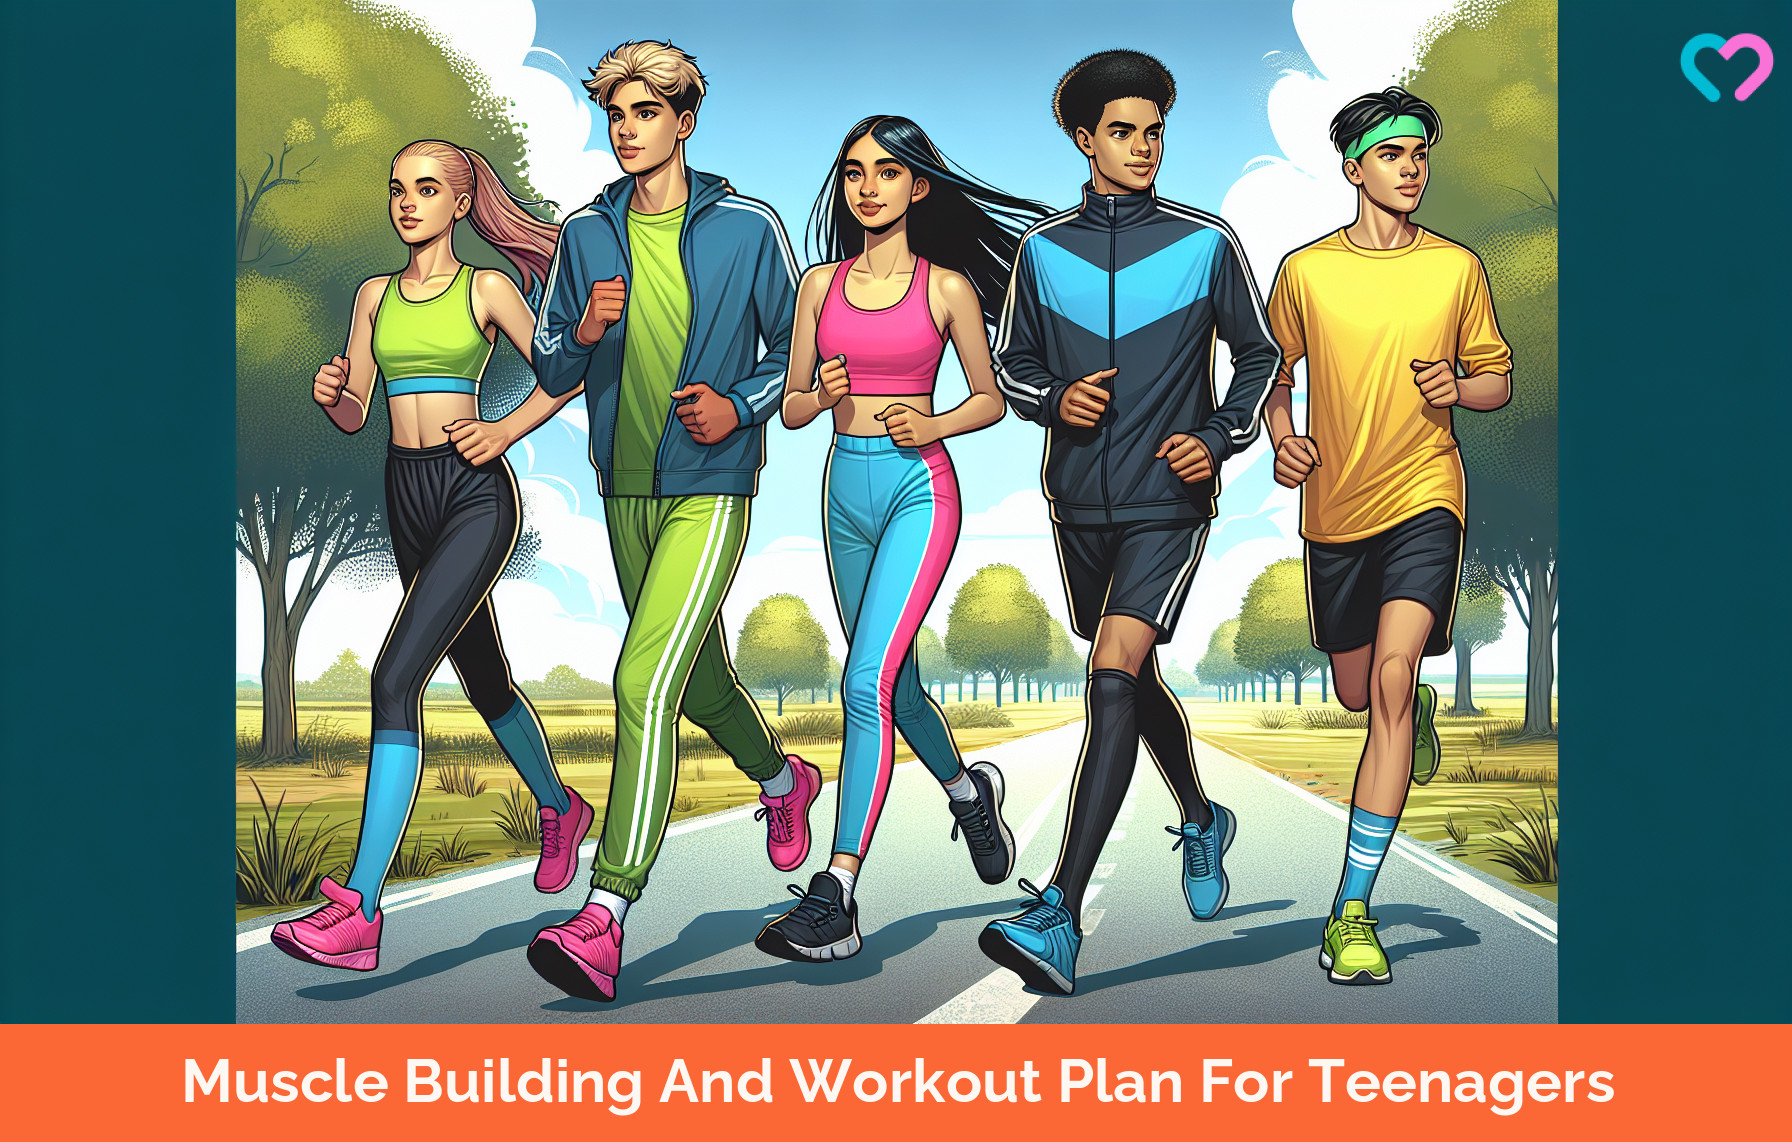 Workout Plan For Teenagers_illustration